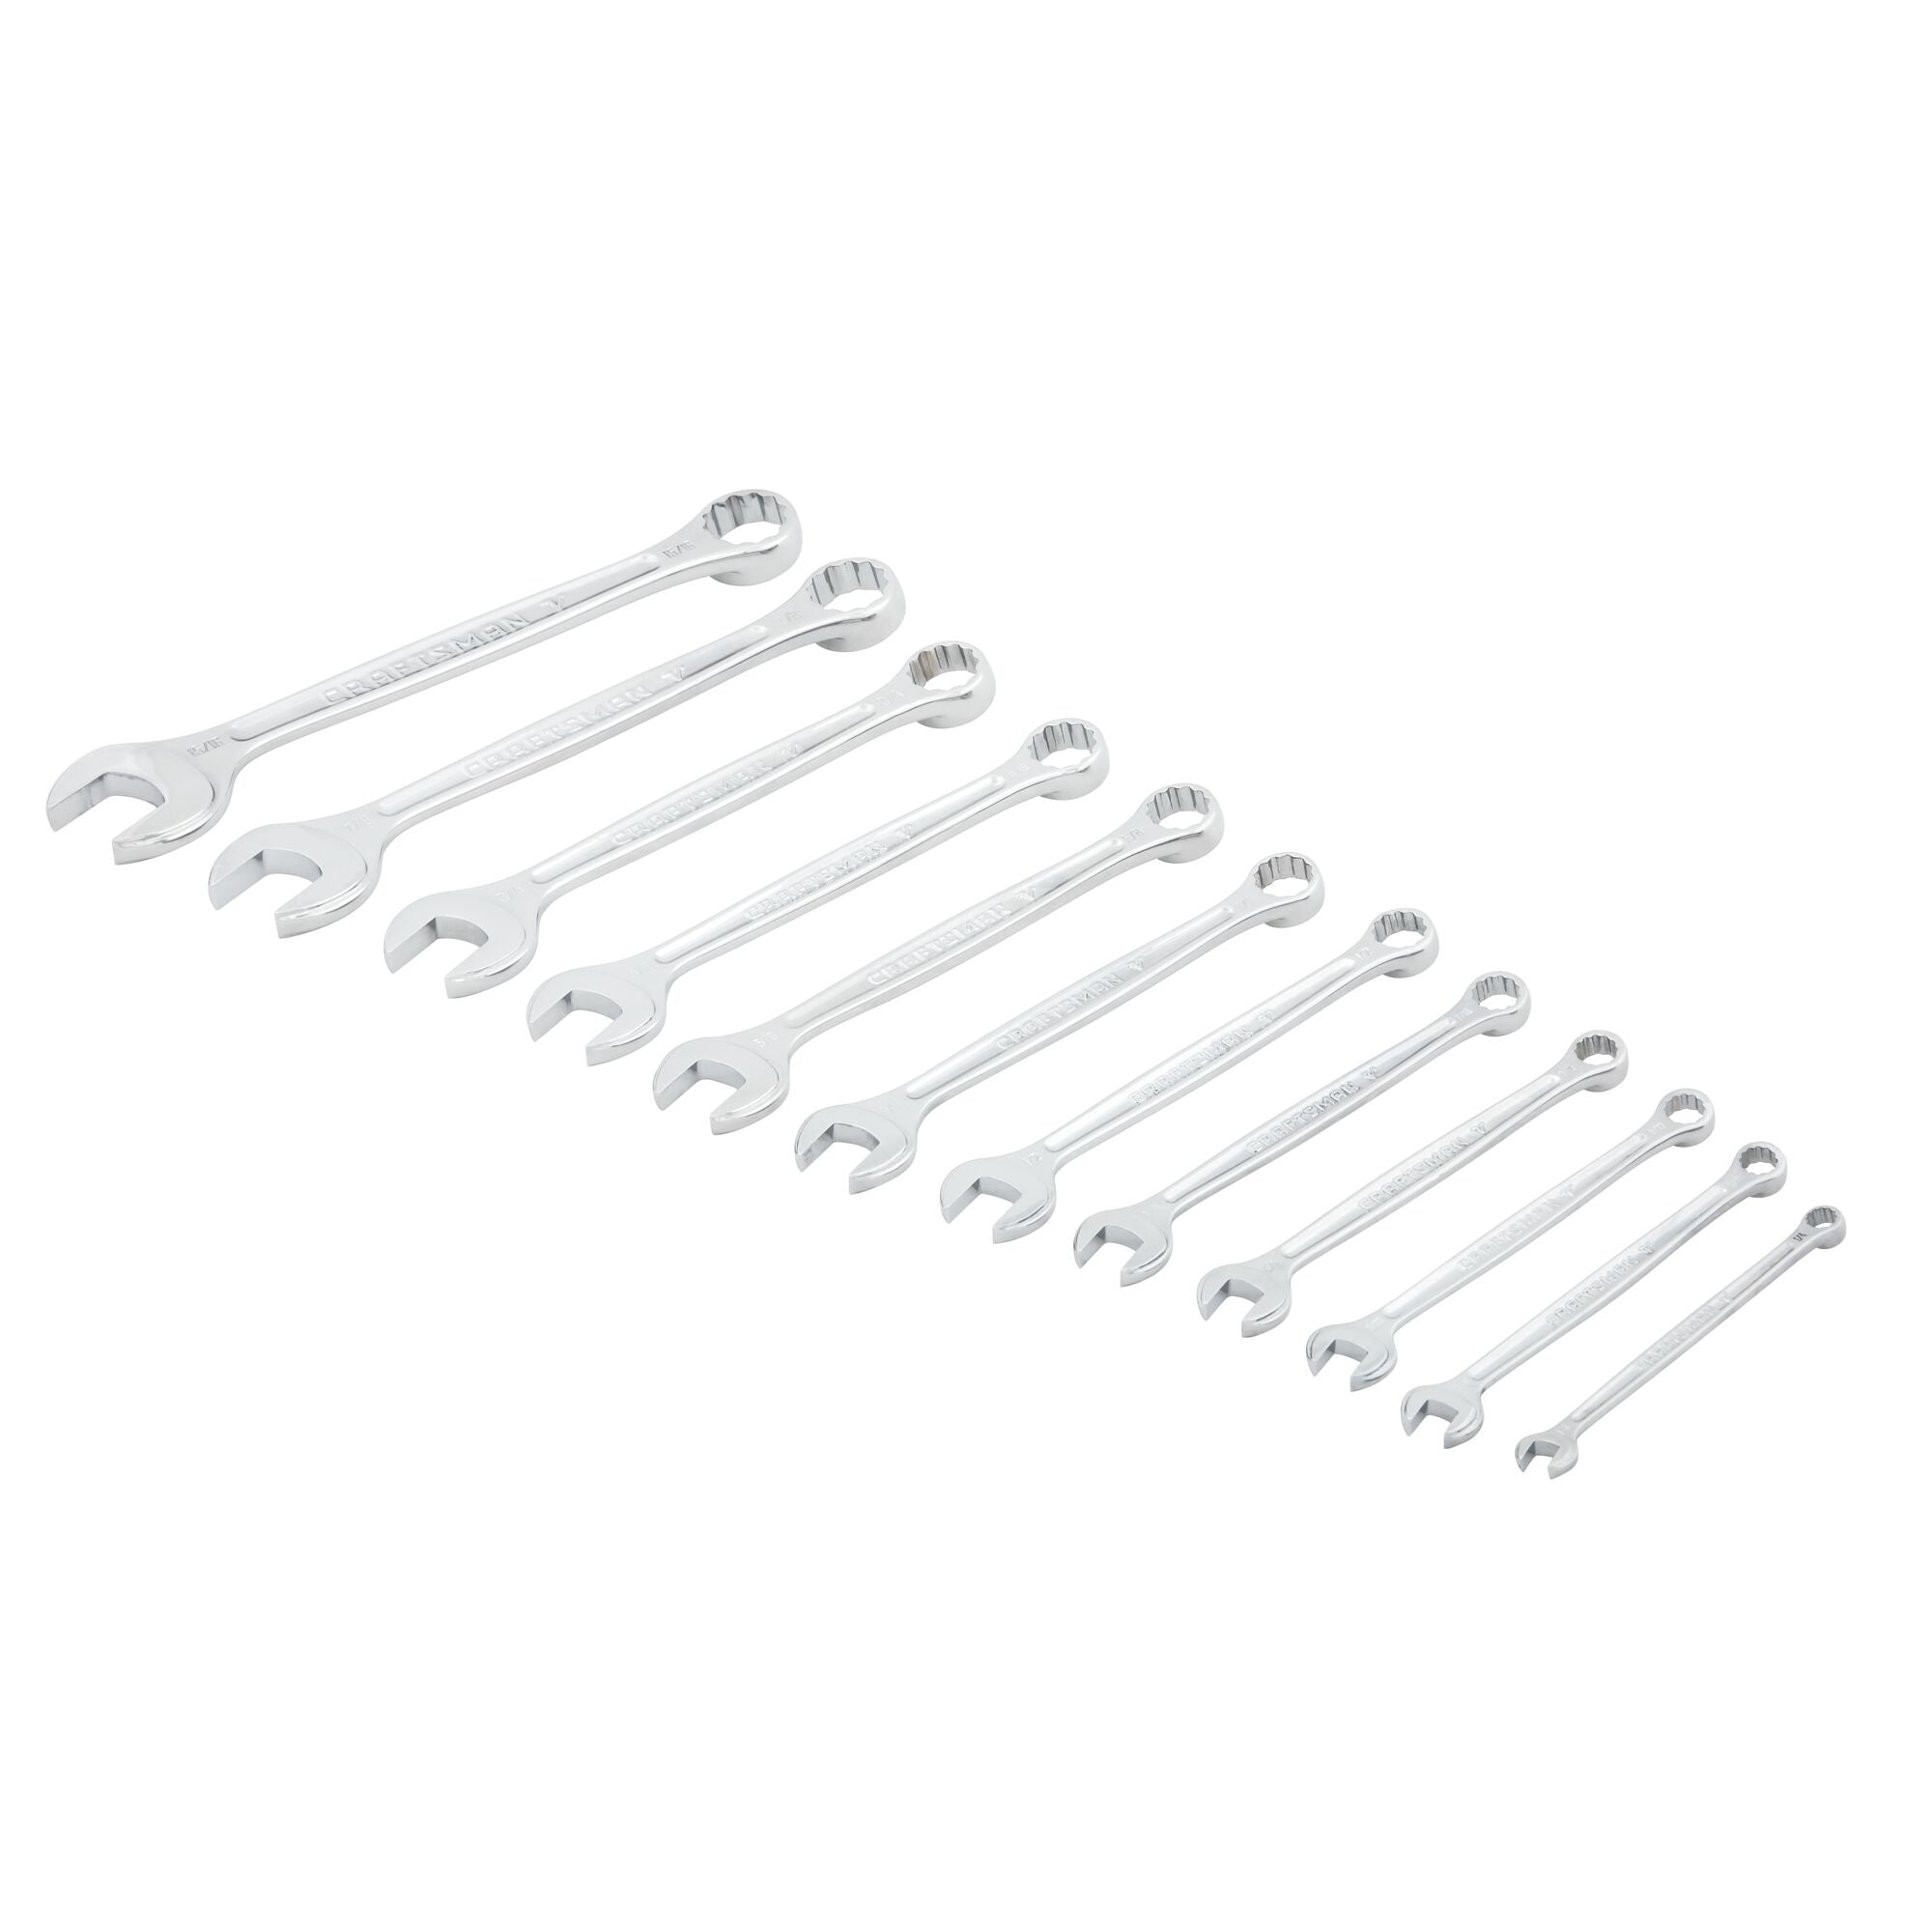 Right profile of V series S A E combination wrench set (12 piece).